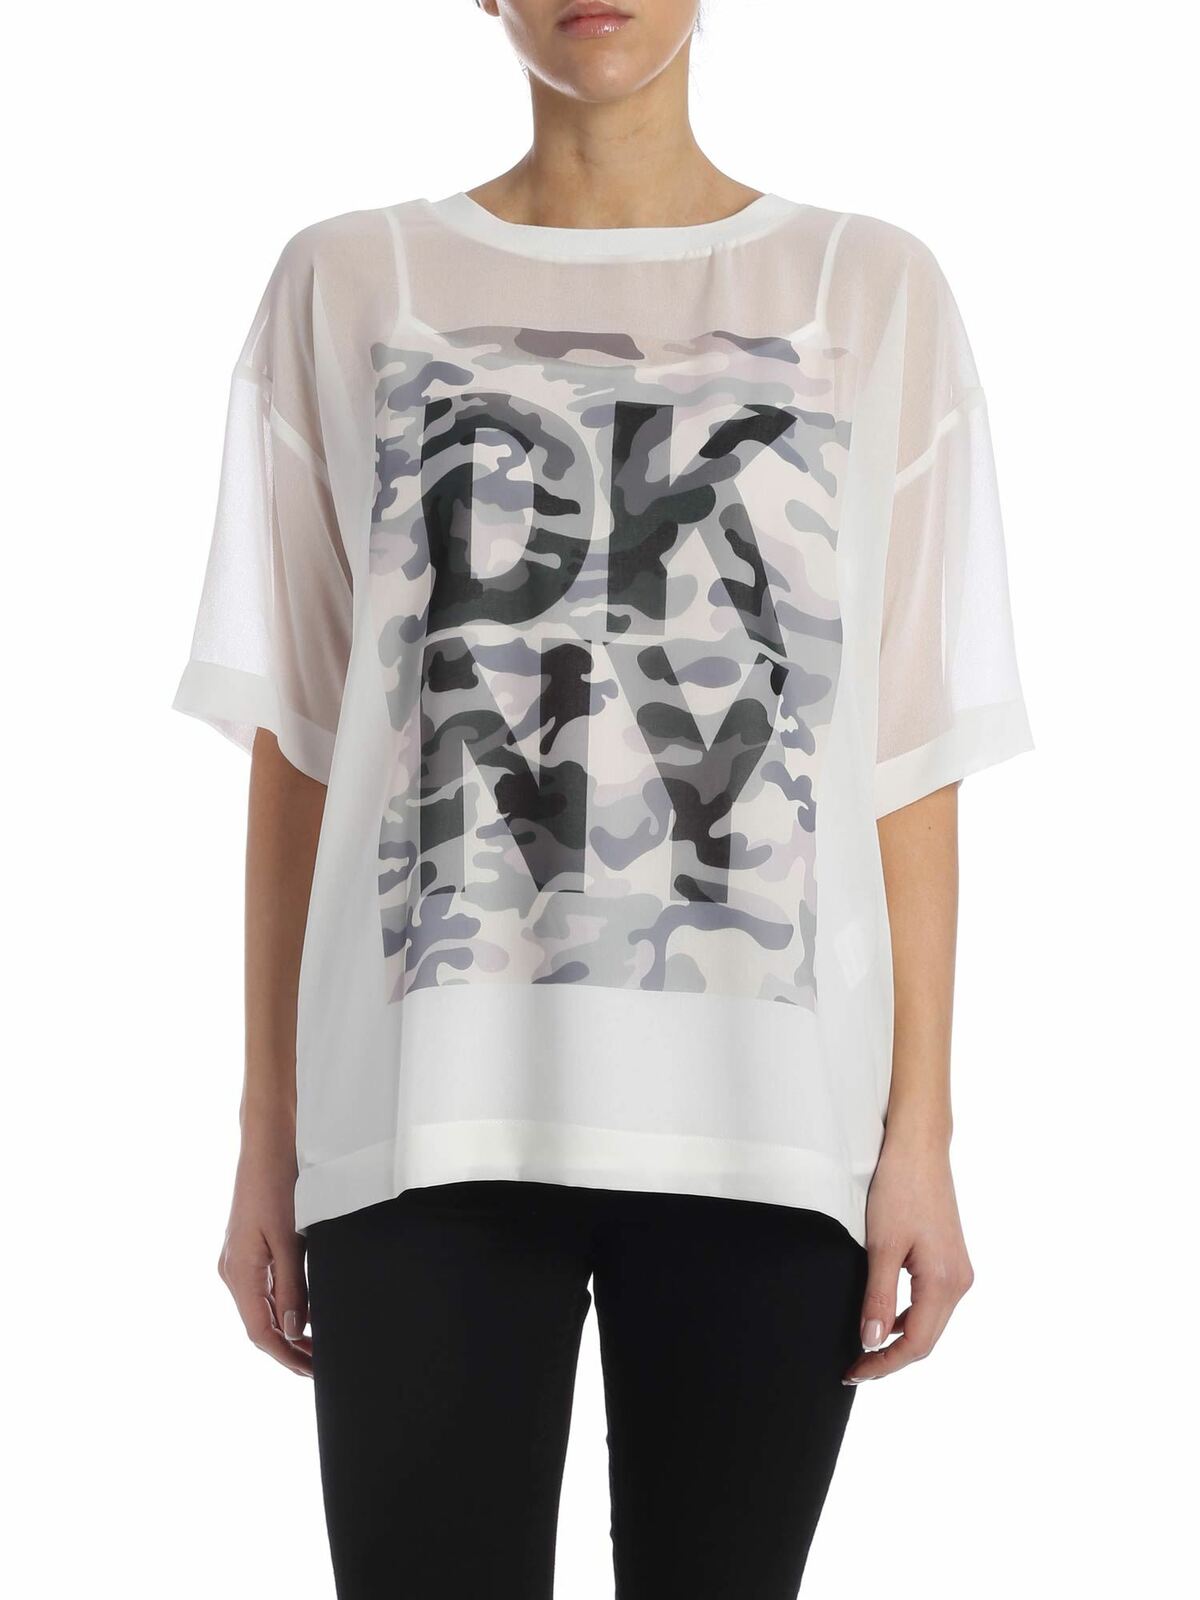 Dkny Camouflage Printed T-shirt In White